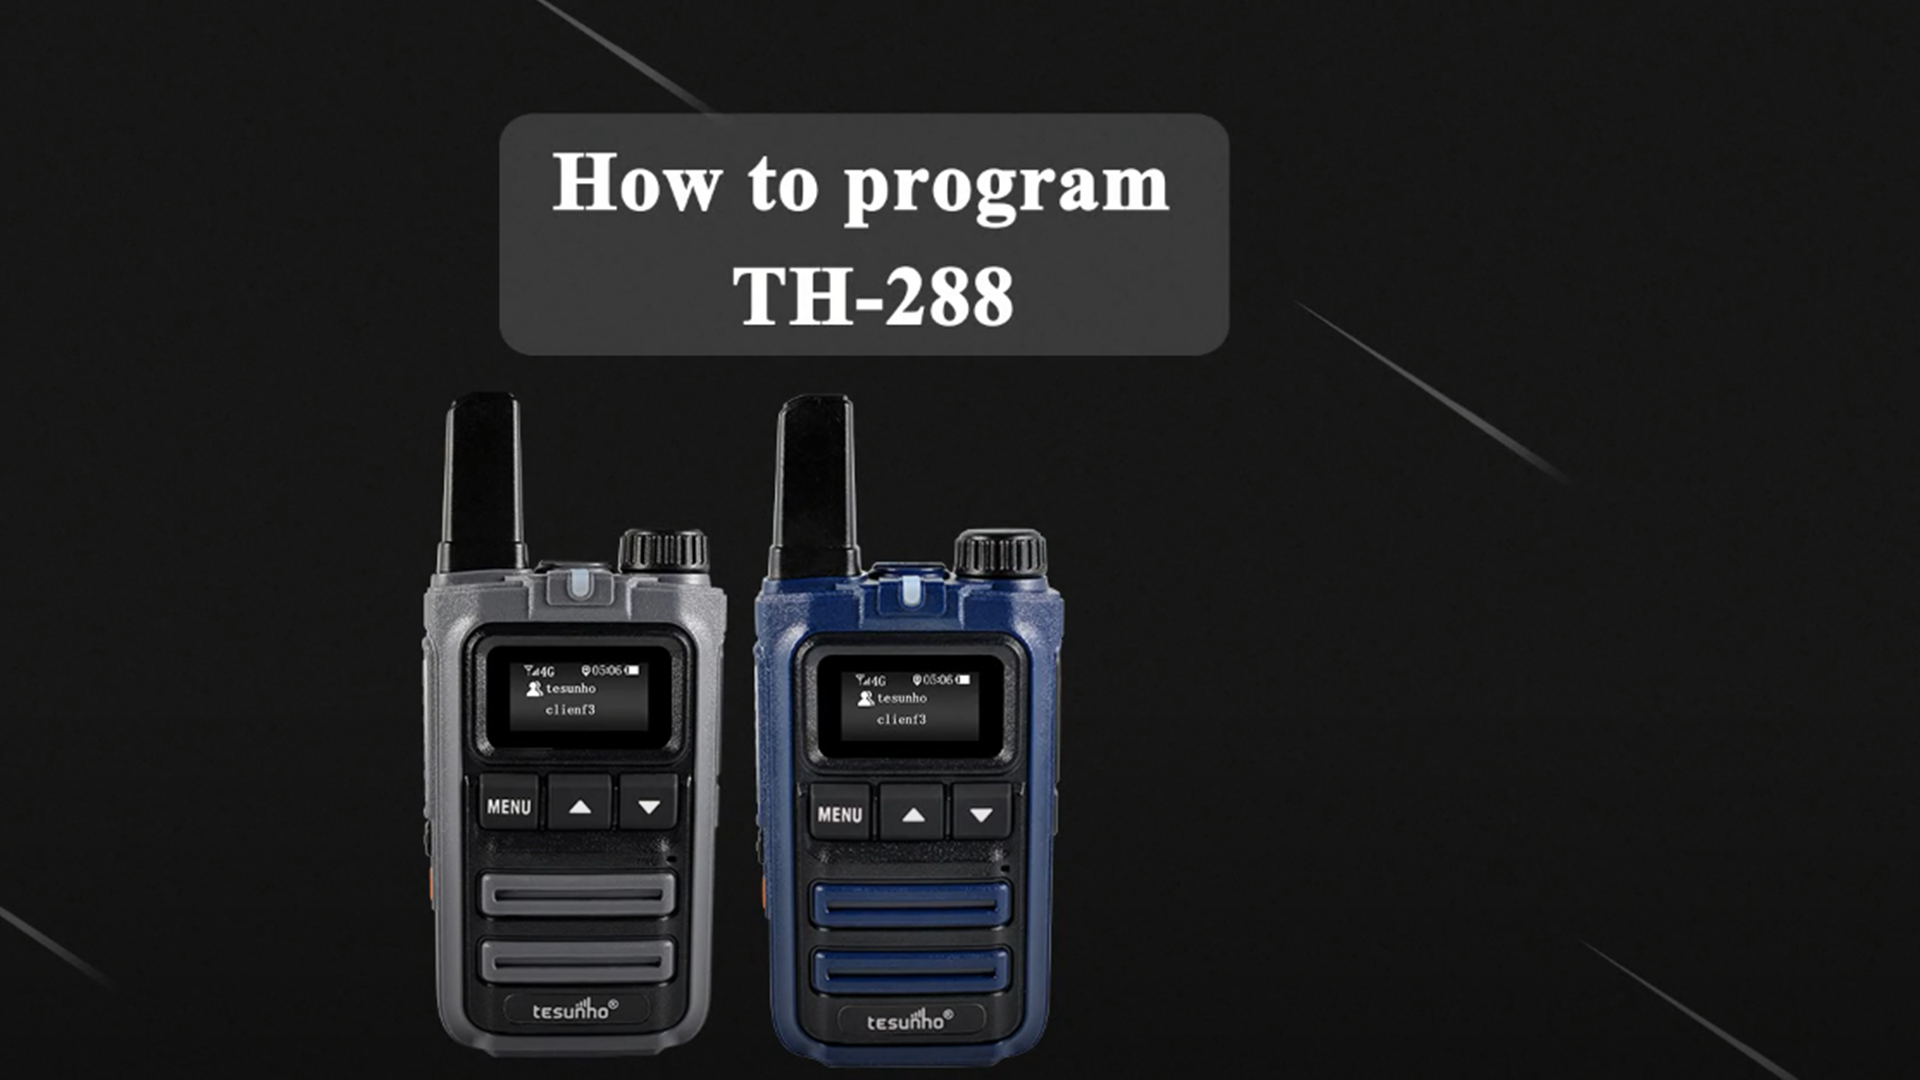 How to program TH-288